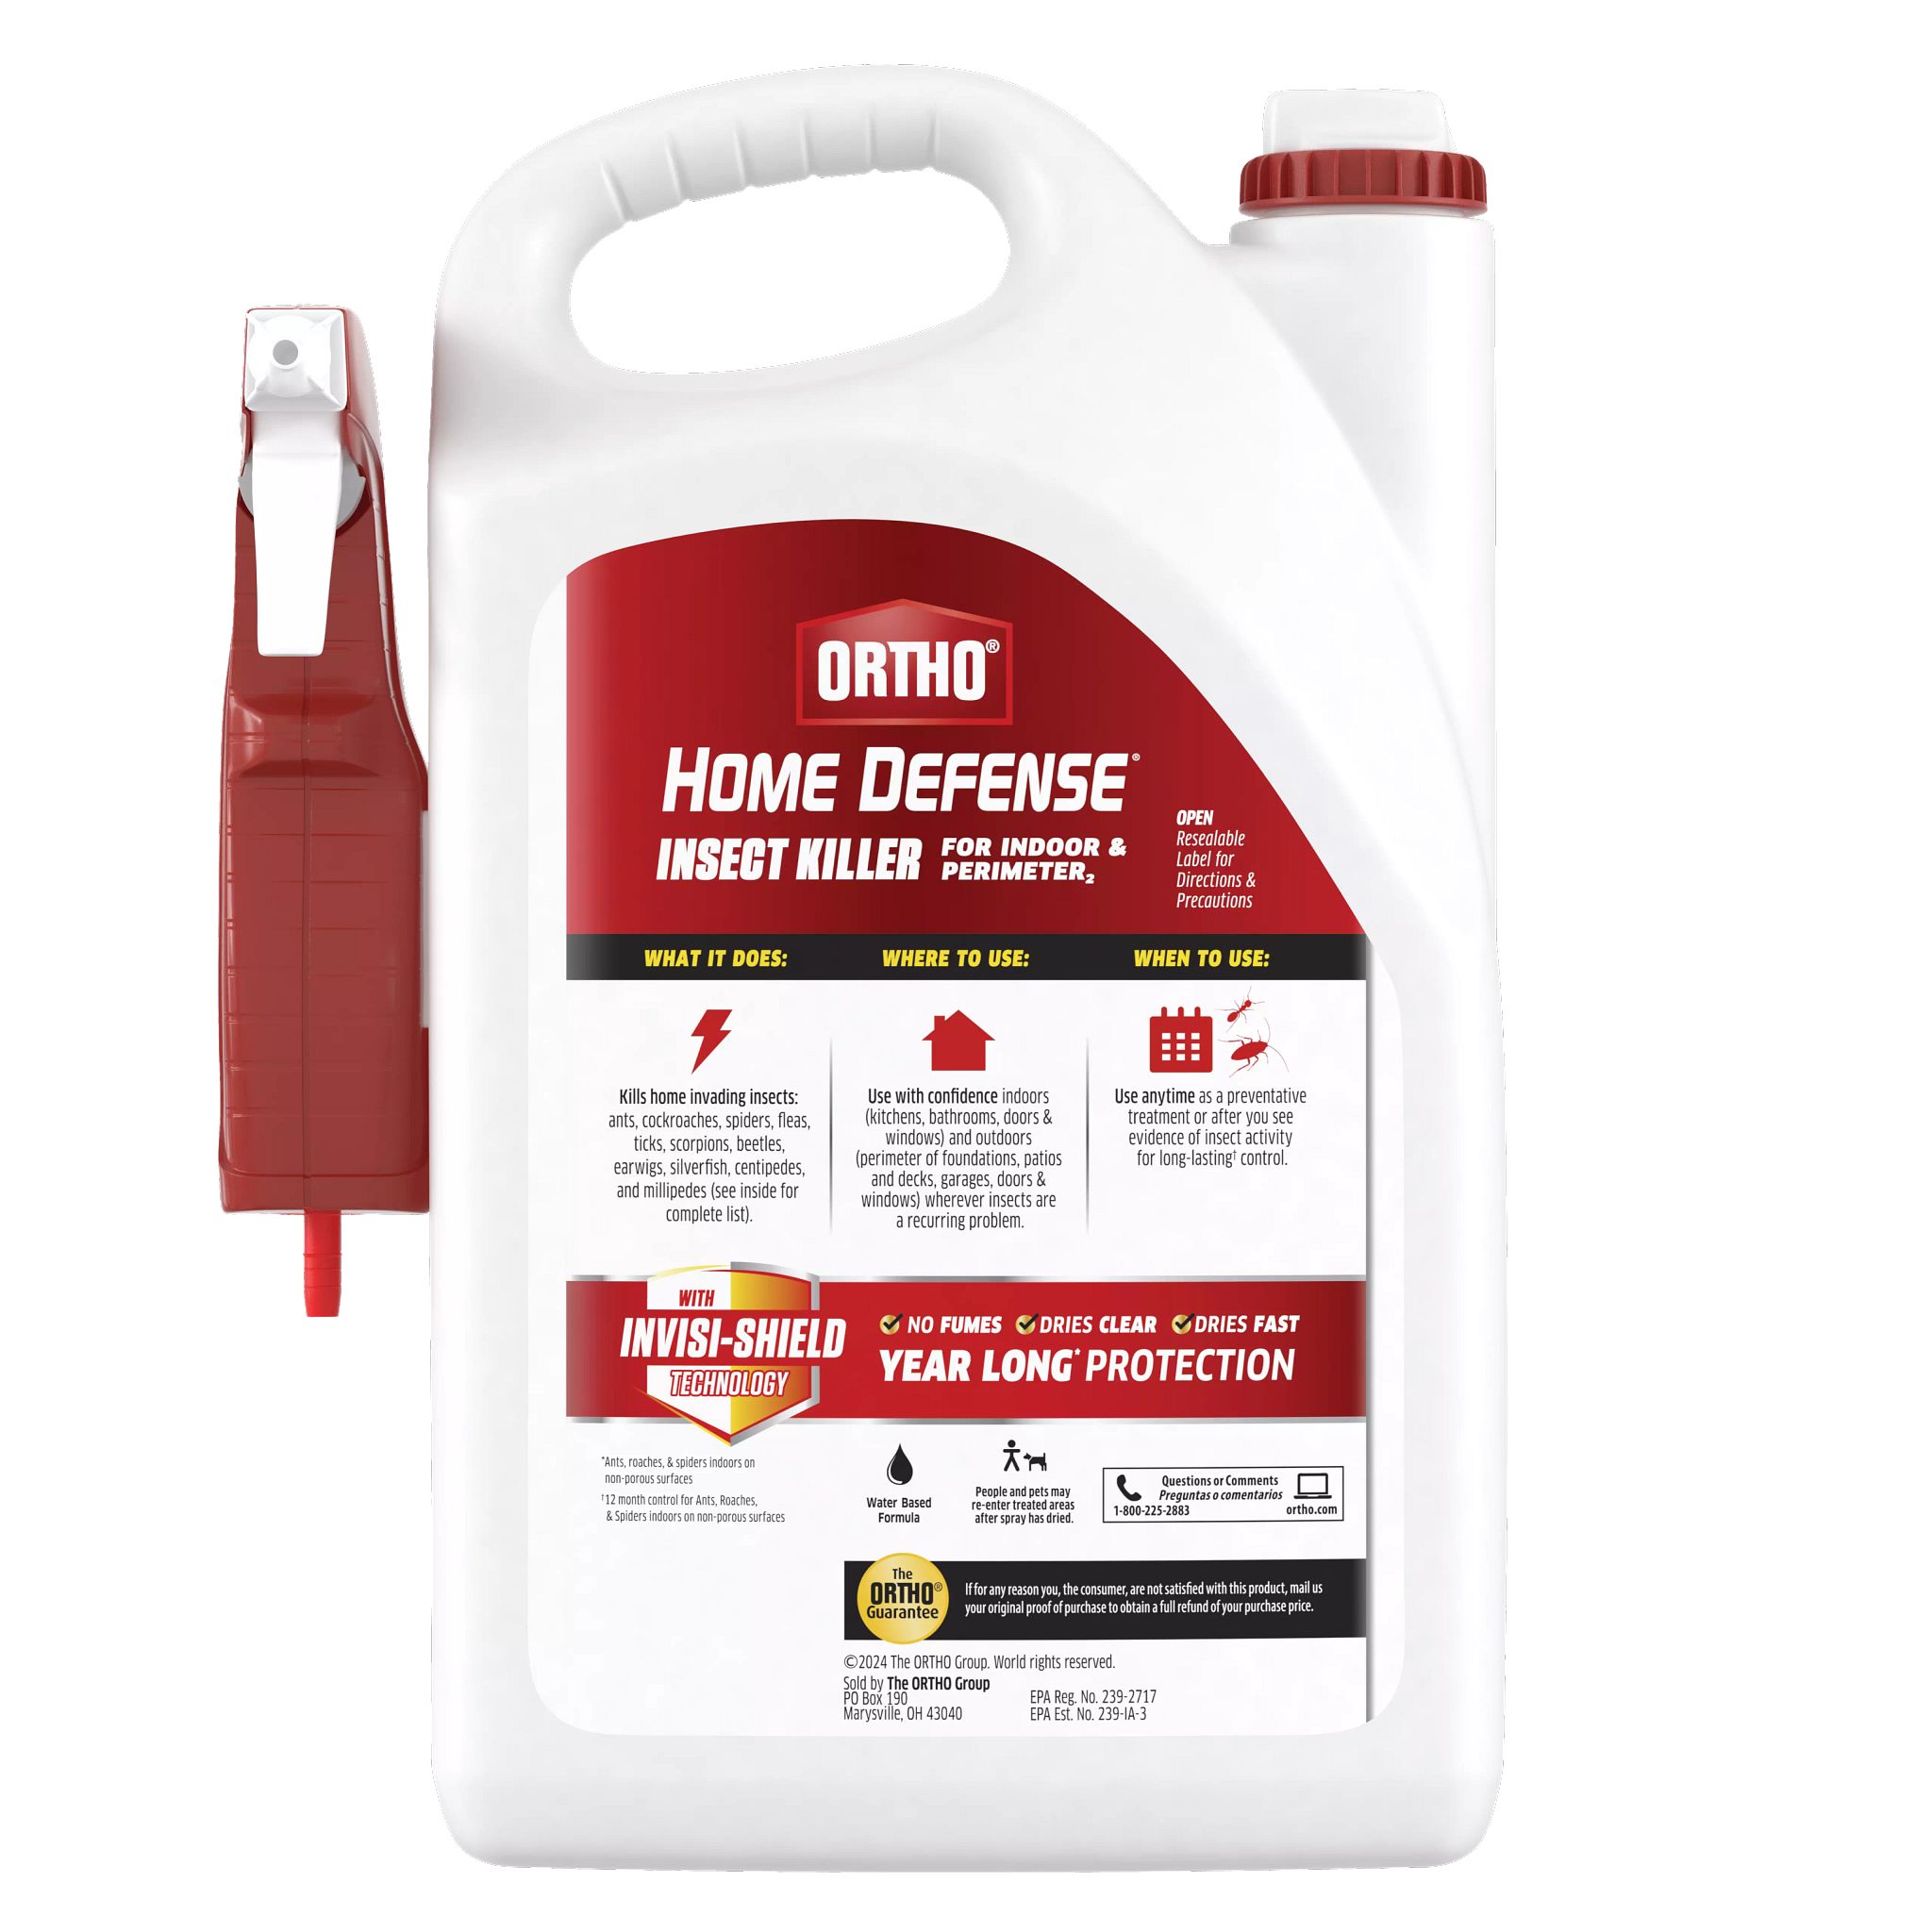 Ortho Home Defense Insect Killer for Indoor & Perimeter2, Controls Ants, Roaches, and More, 1 gal. - image 2 of 5